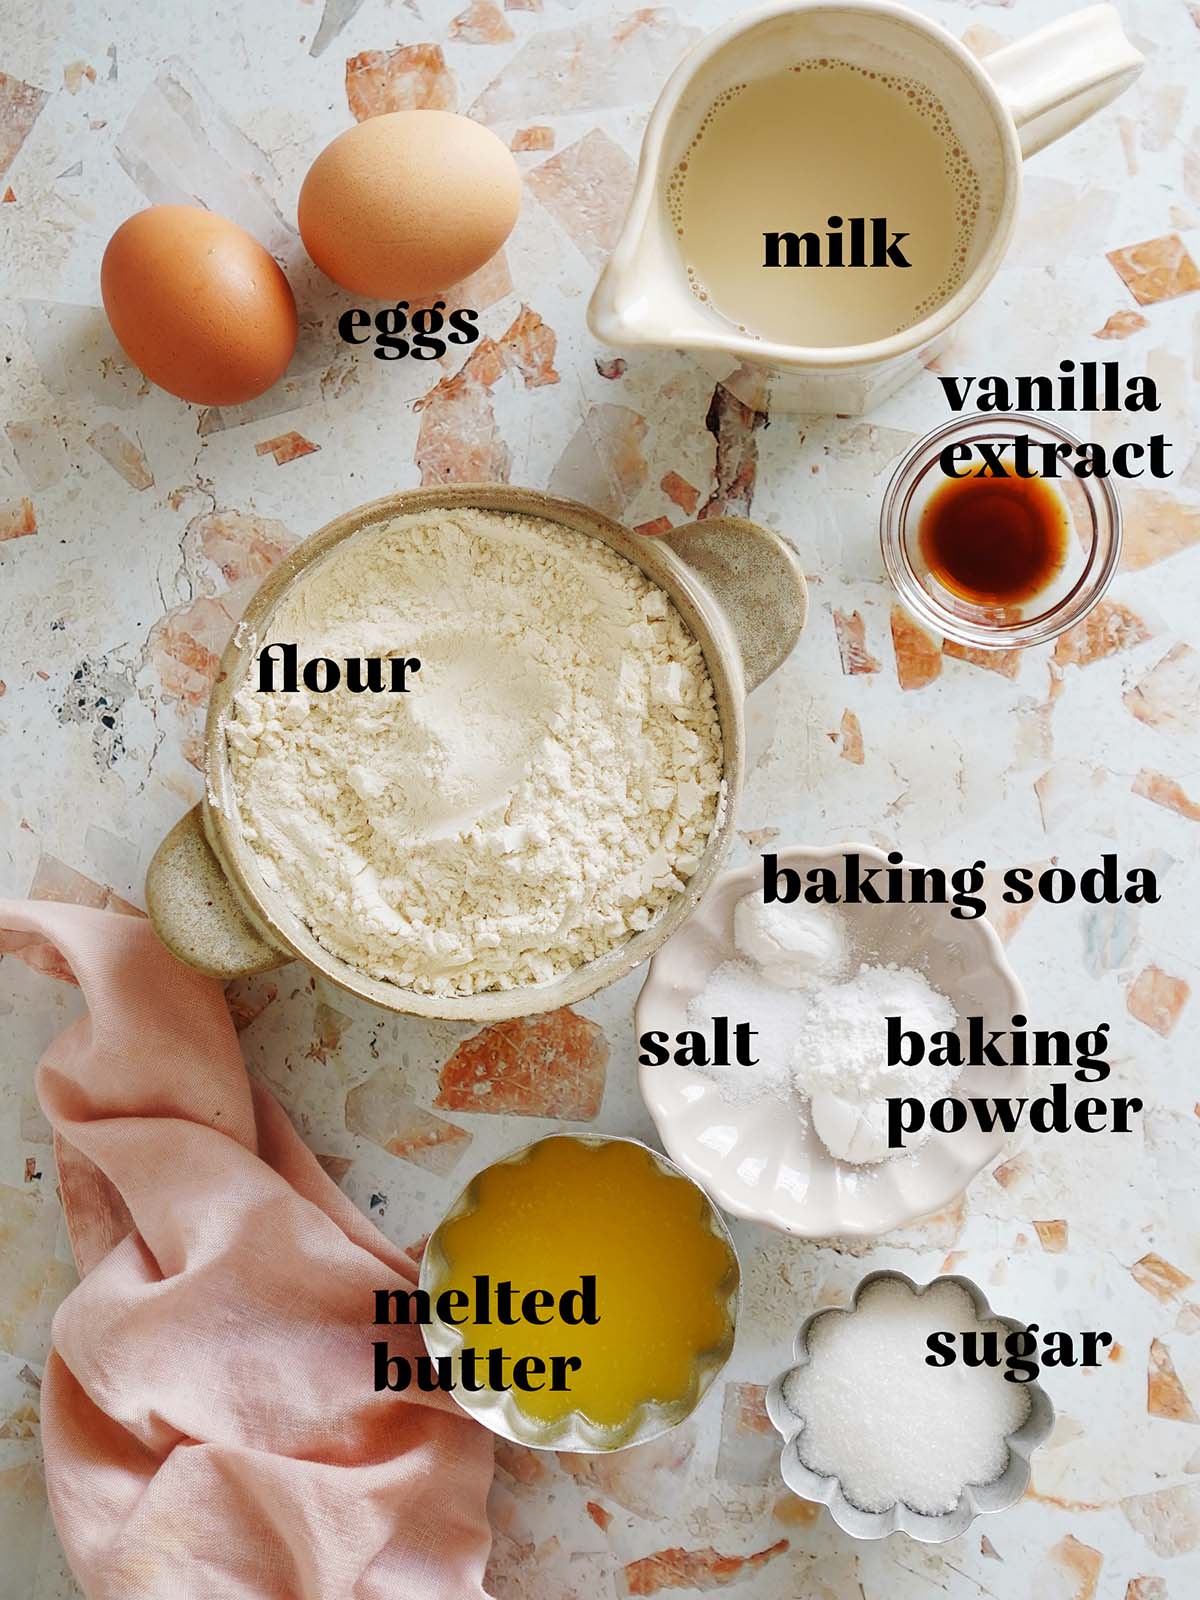 The ingredients for this recipe on a stone backdrop.